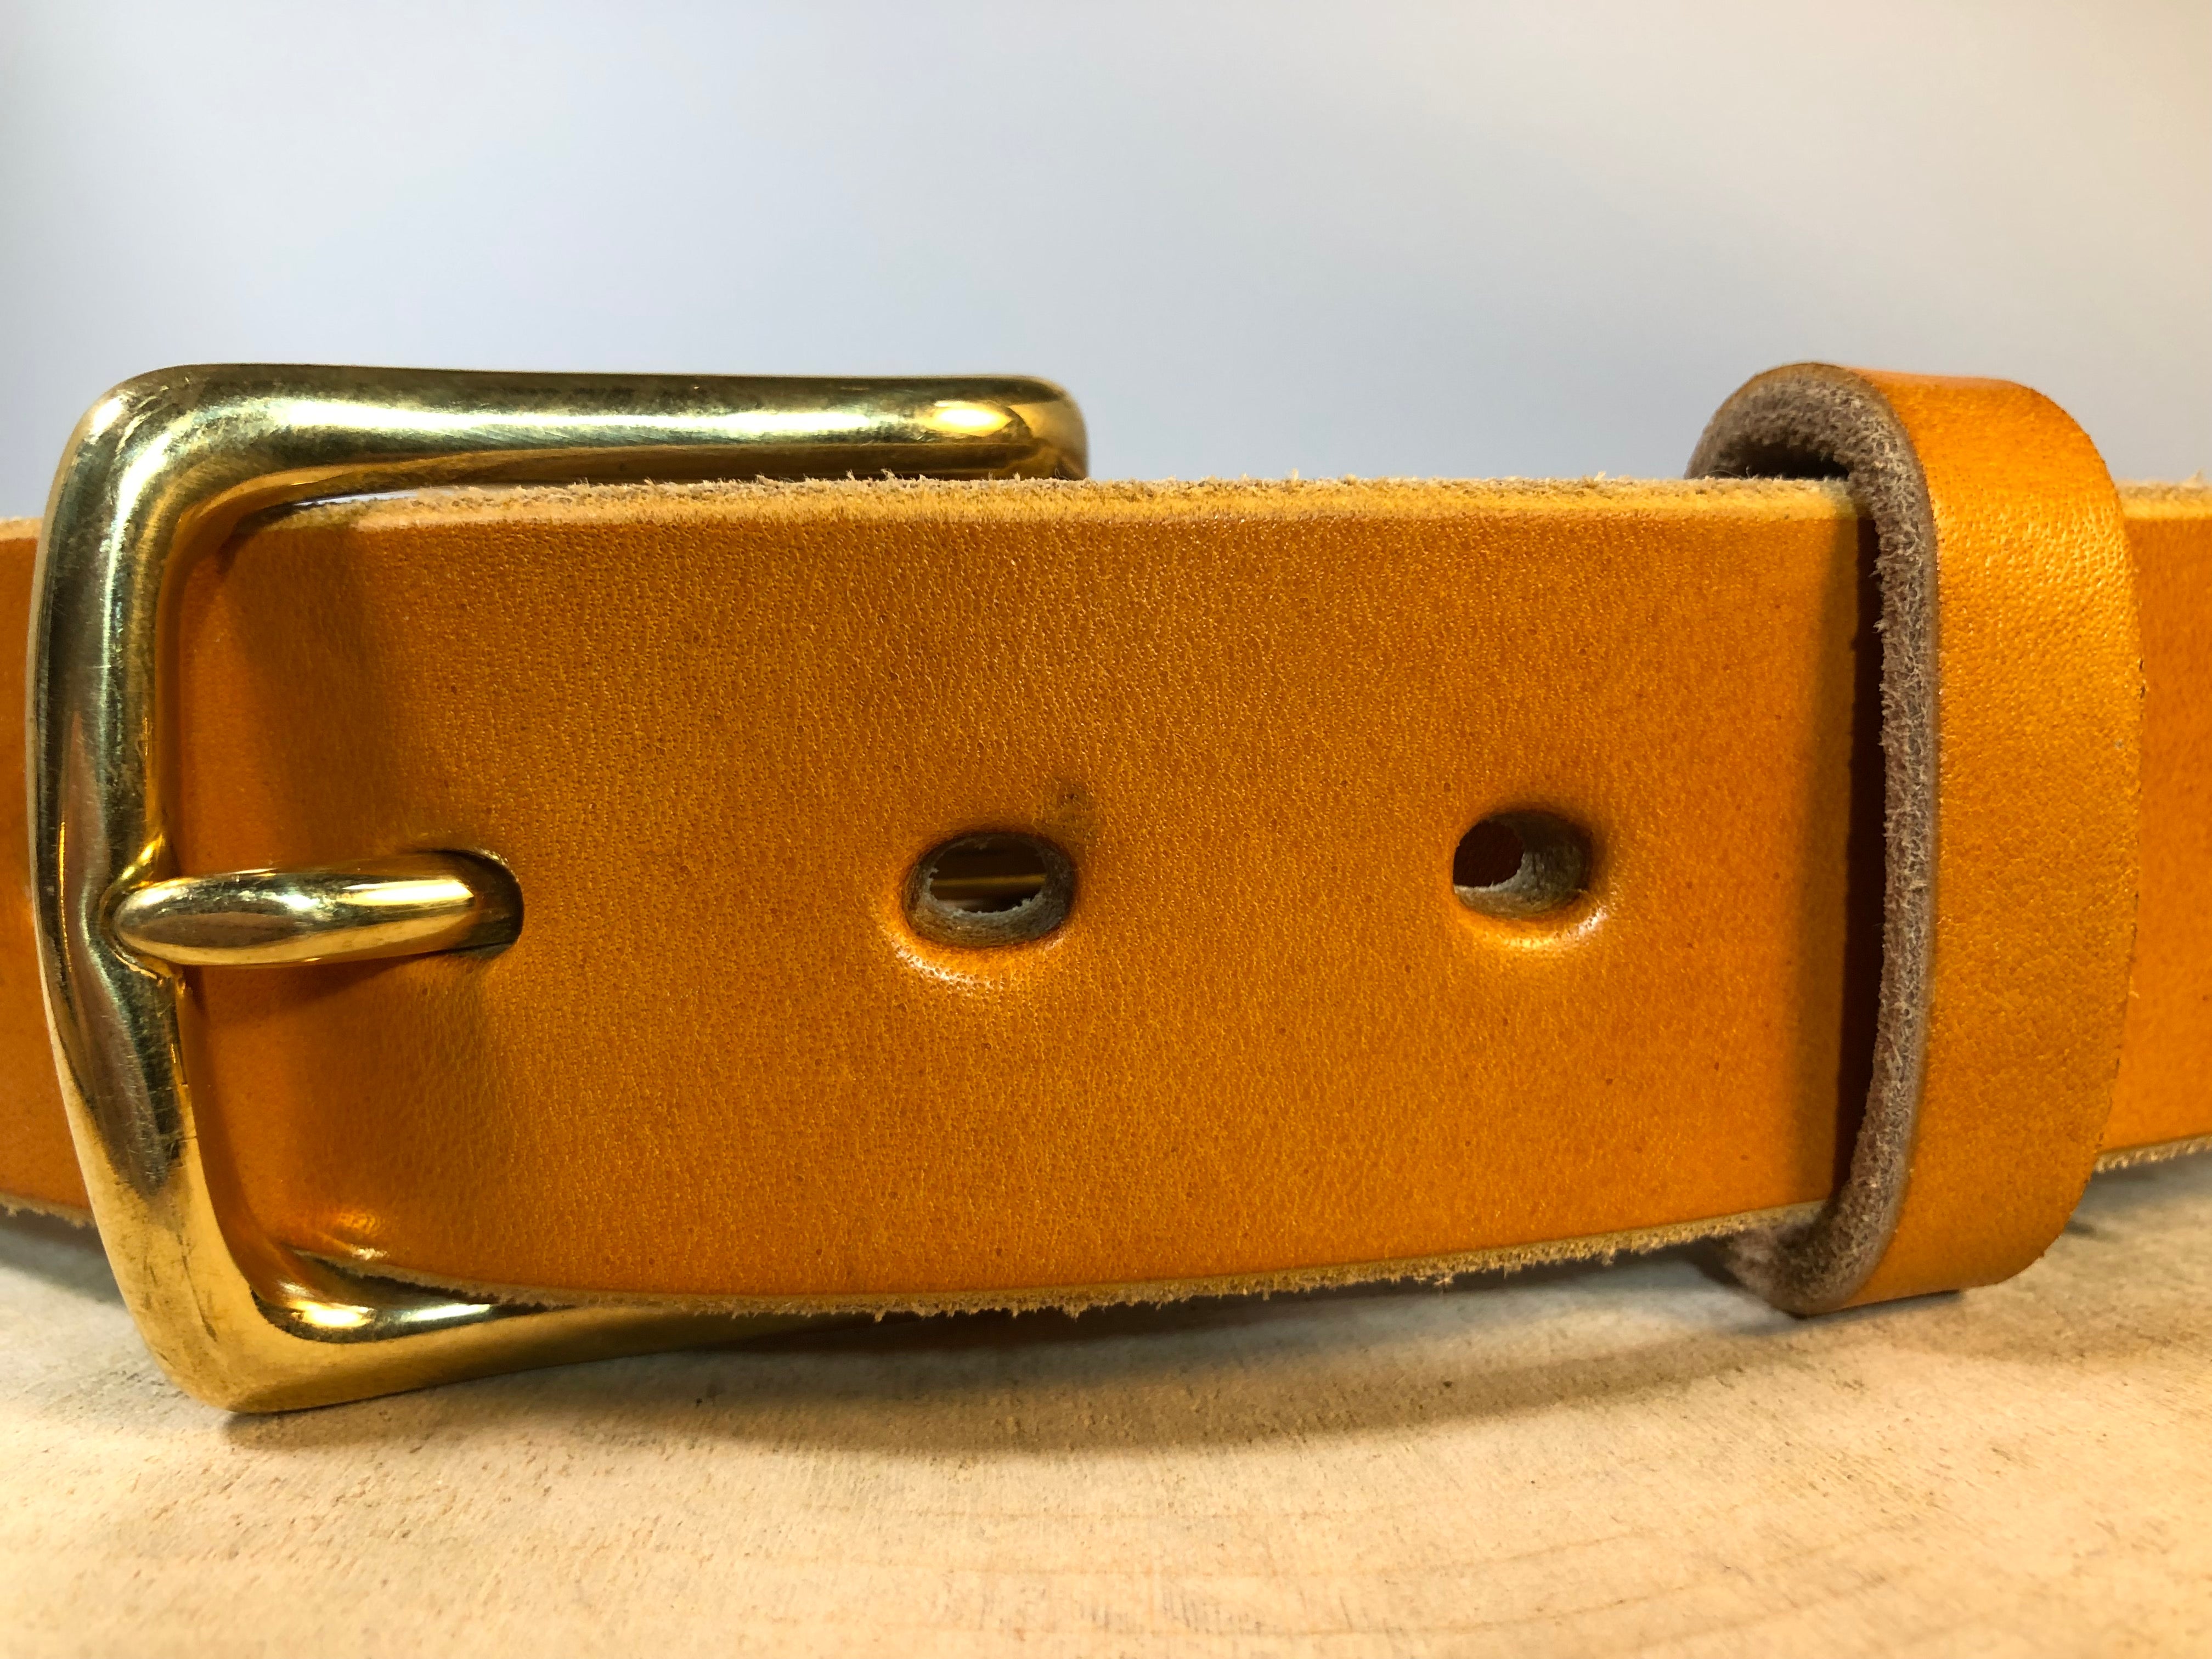 Tan Leather Belt hand crafted in UK